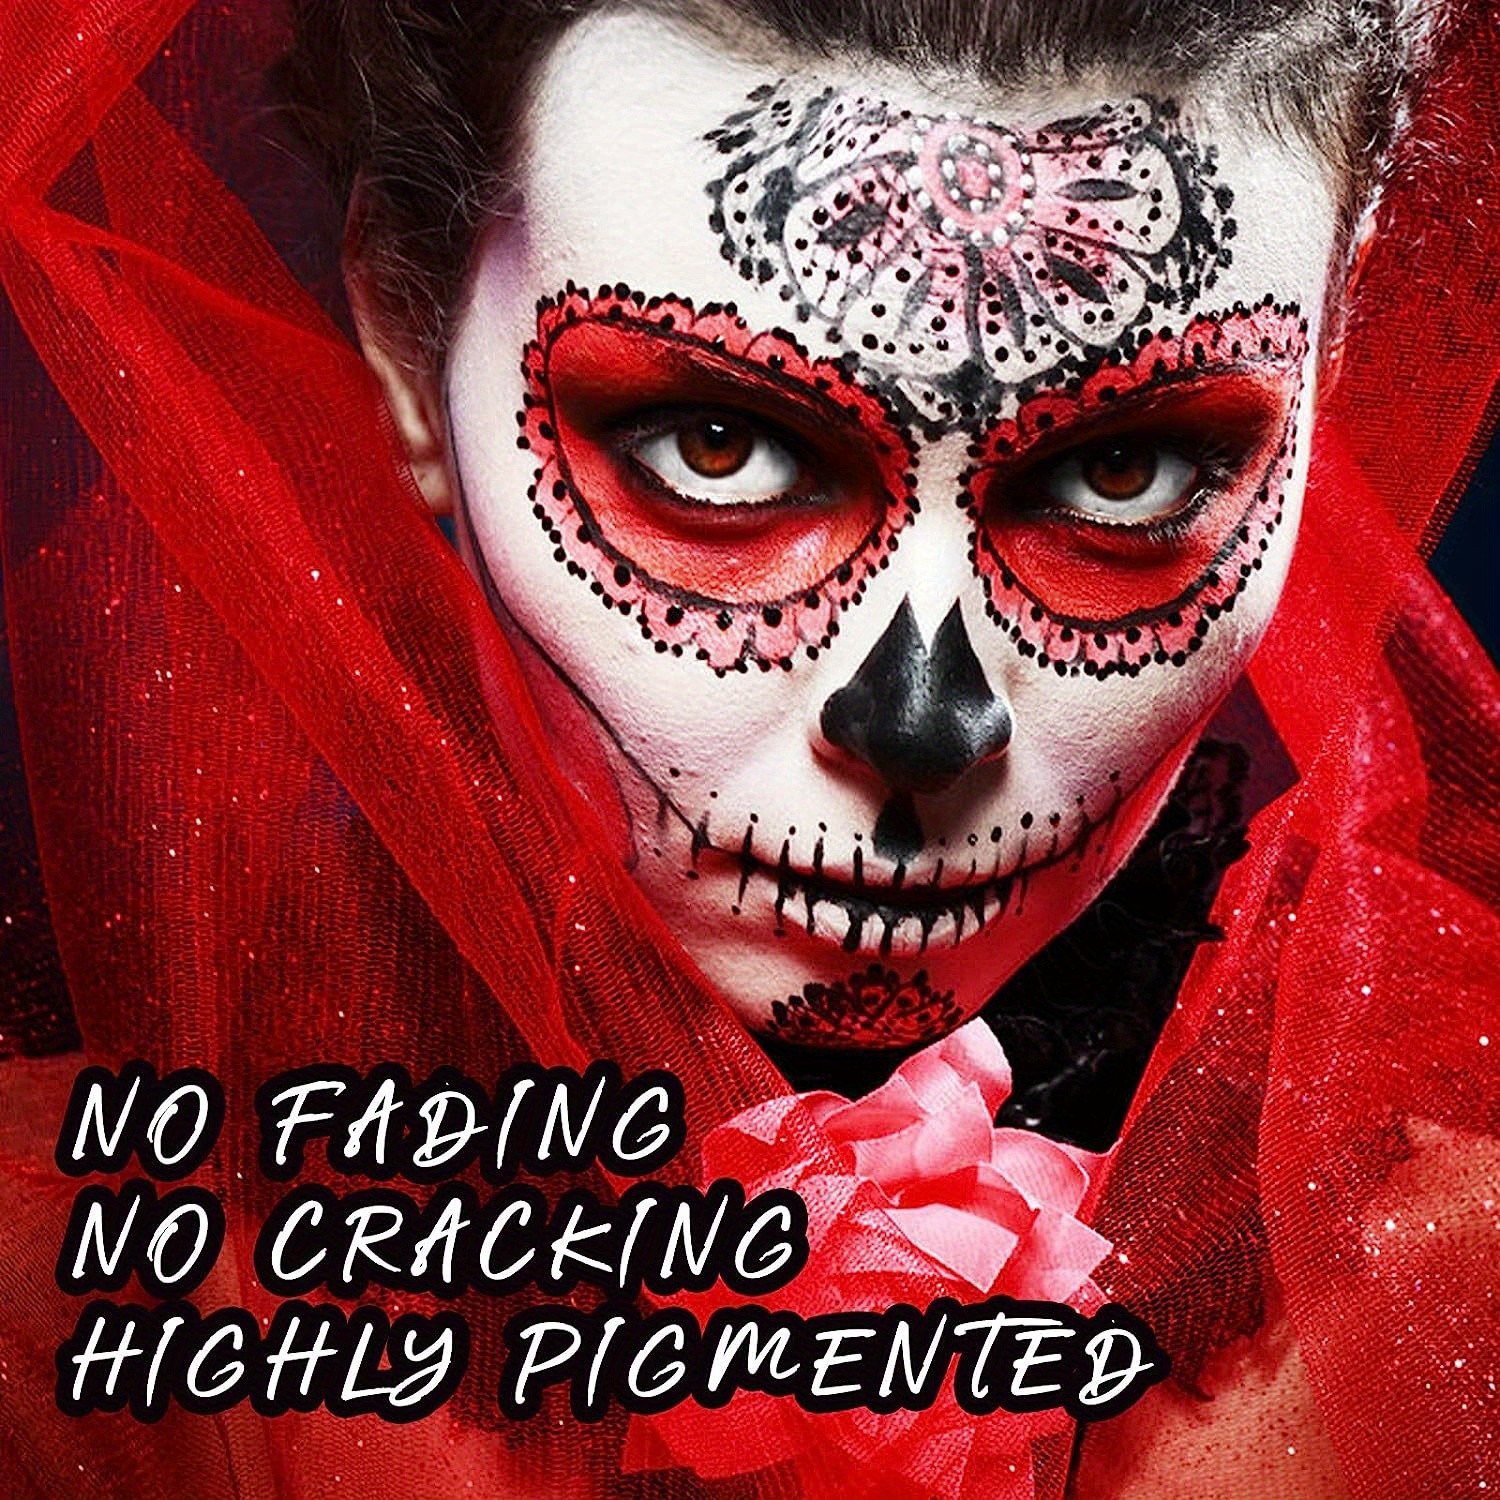 30ml Black/Red Face Body Paint Non-Toxic,Smudge-proof Liquid Full Body Paint,  for Halloween Special Effects Cosplay Clown Makeup - AliExpress